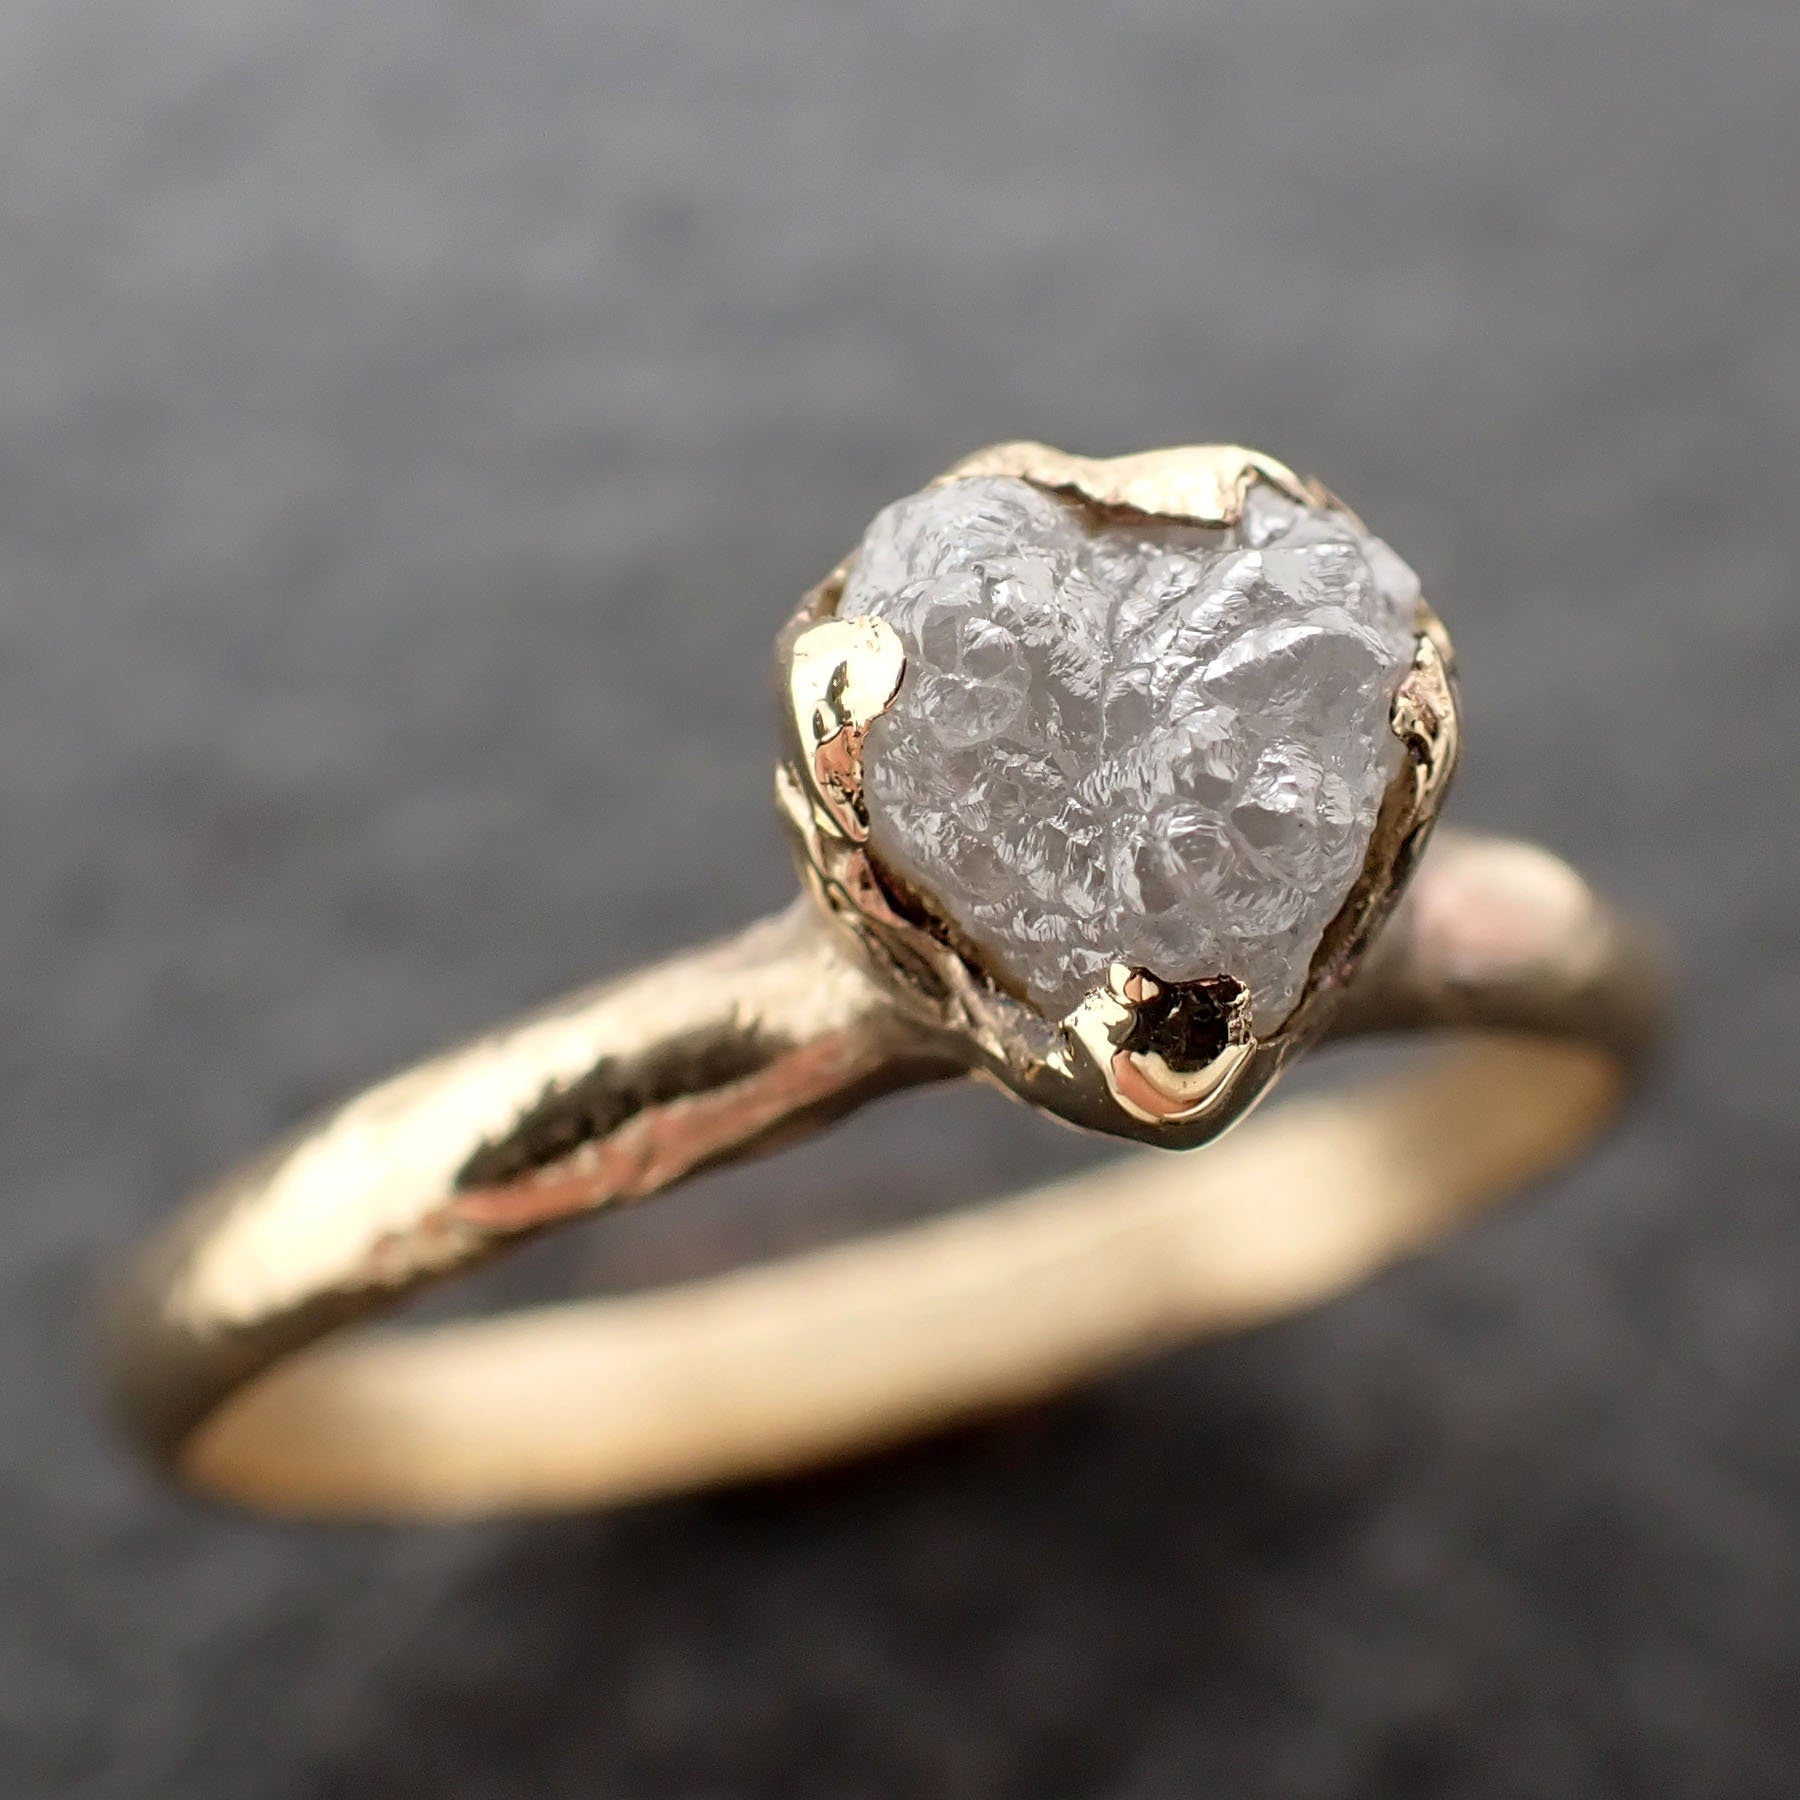 Raw Diamond Engagement Ring Rough Uncut Diamond Solitaire Recycled 14k yellow gold Conflict Free Diamond Wedding Promise 3119